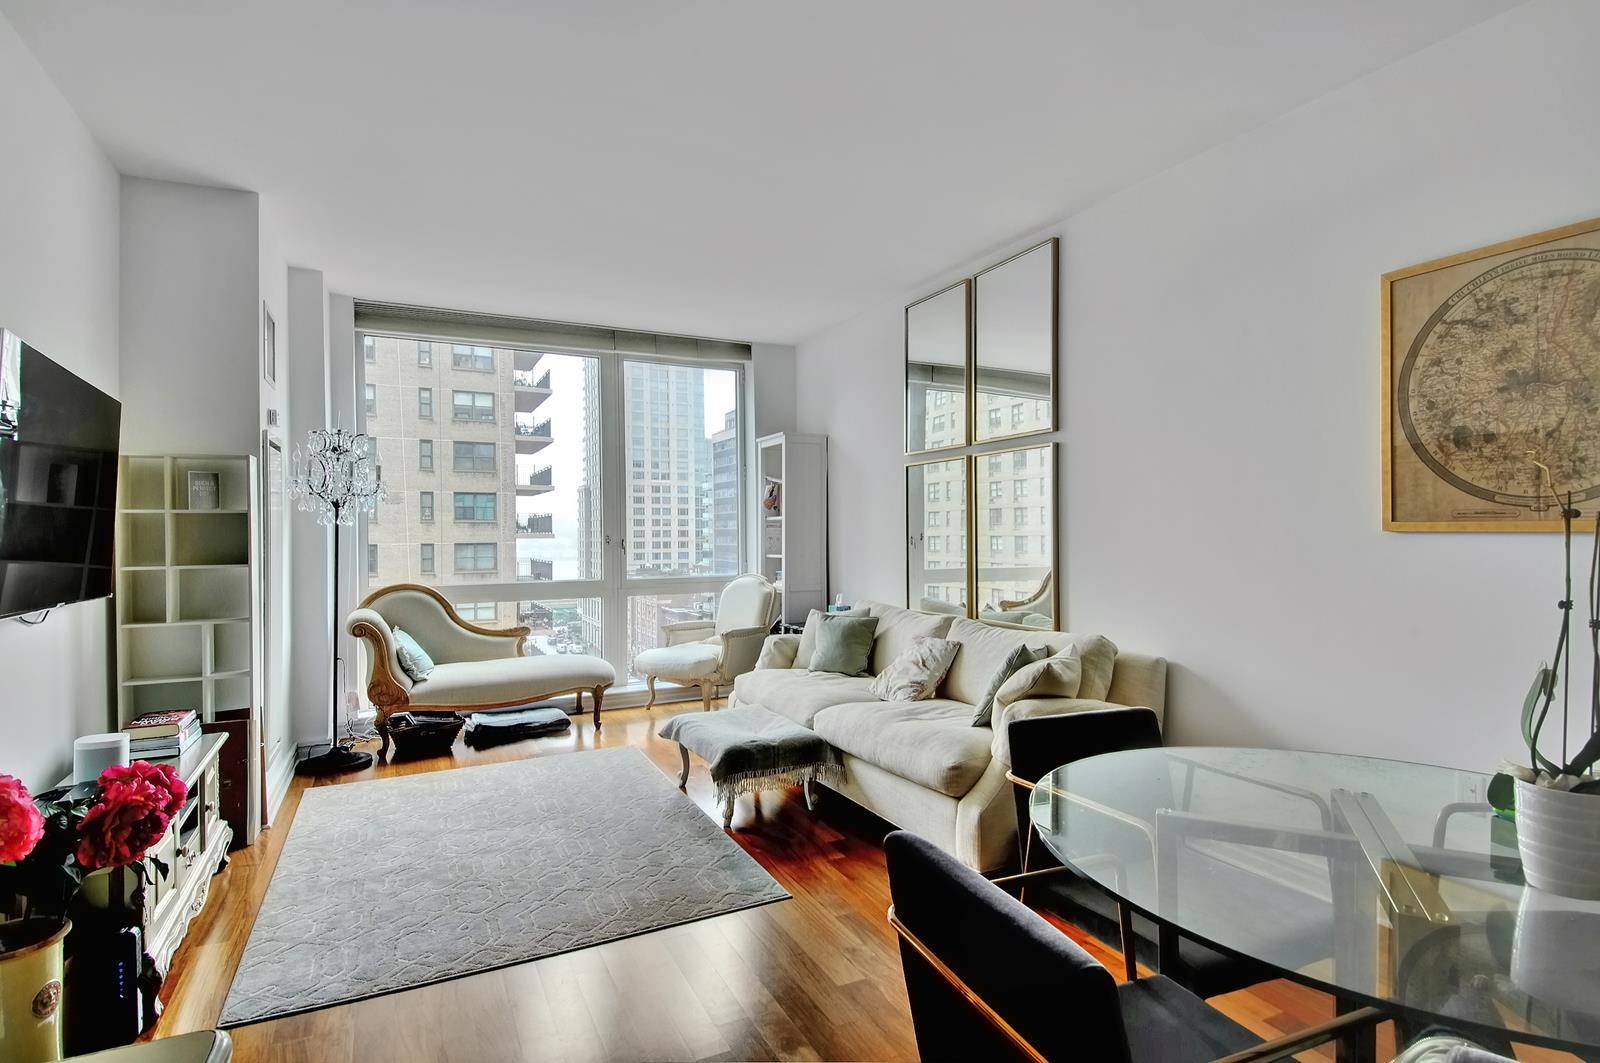 This stunning One Bedroom residence located in a Luxury Condo Building in prime Upper West Side area, offering amazing space, renovations, amenities and city views to call it your NYC ...